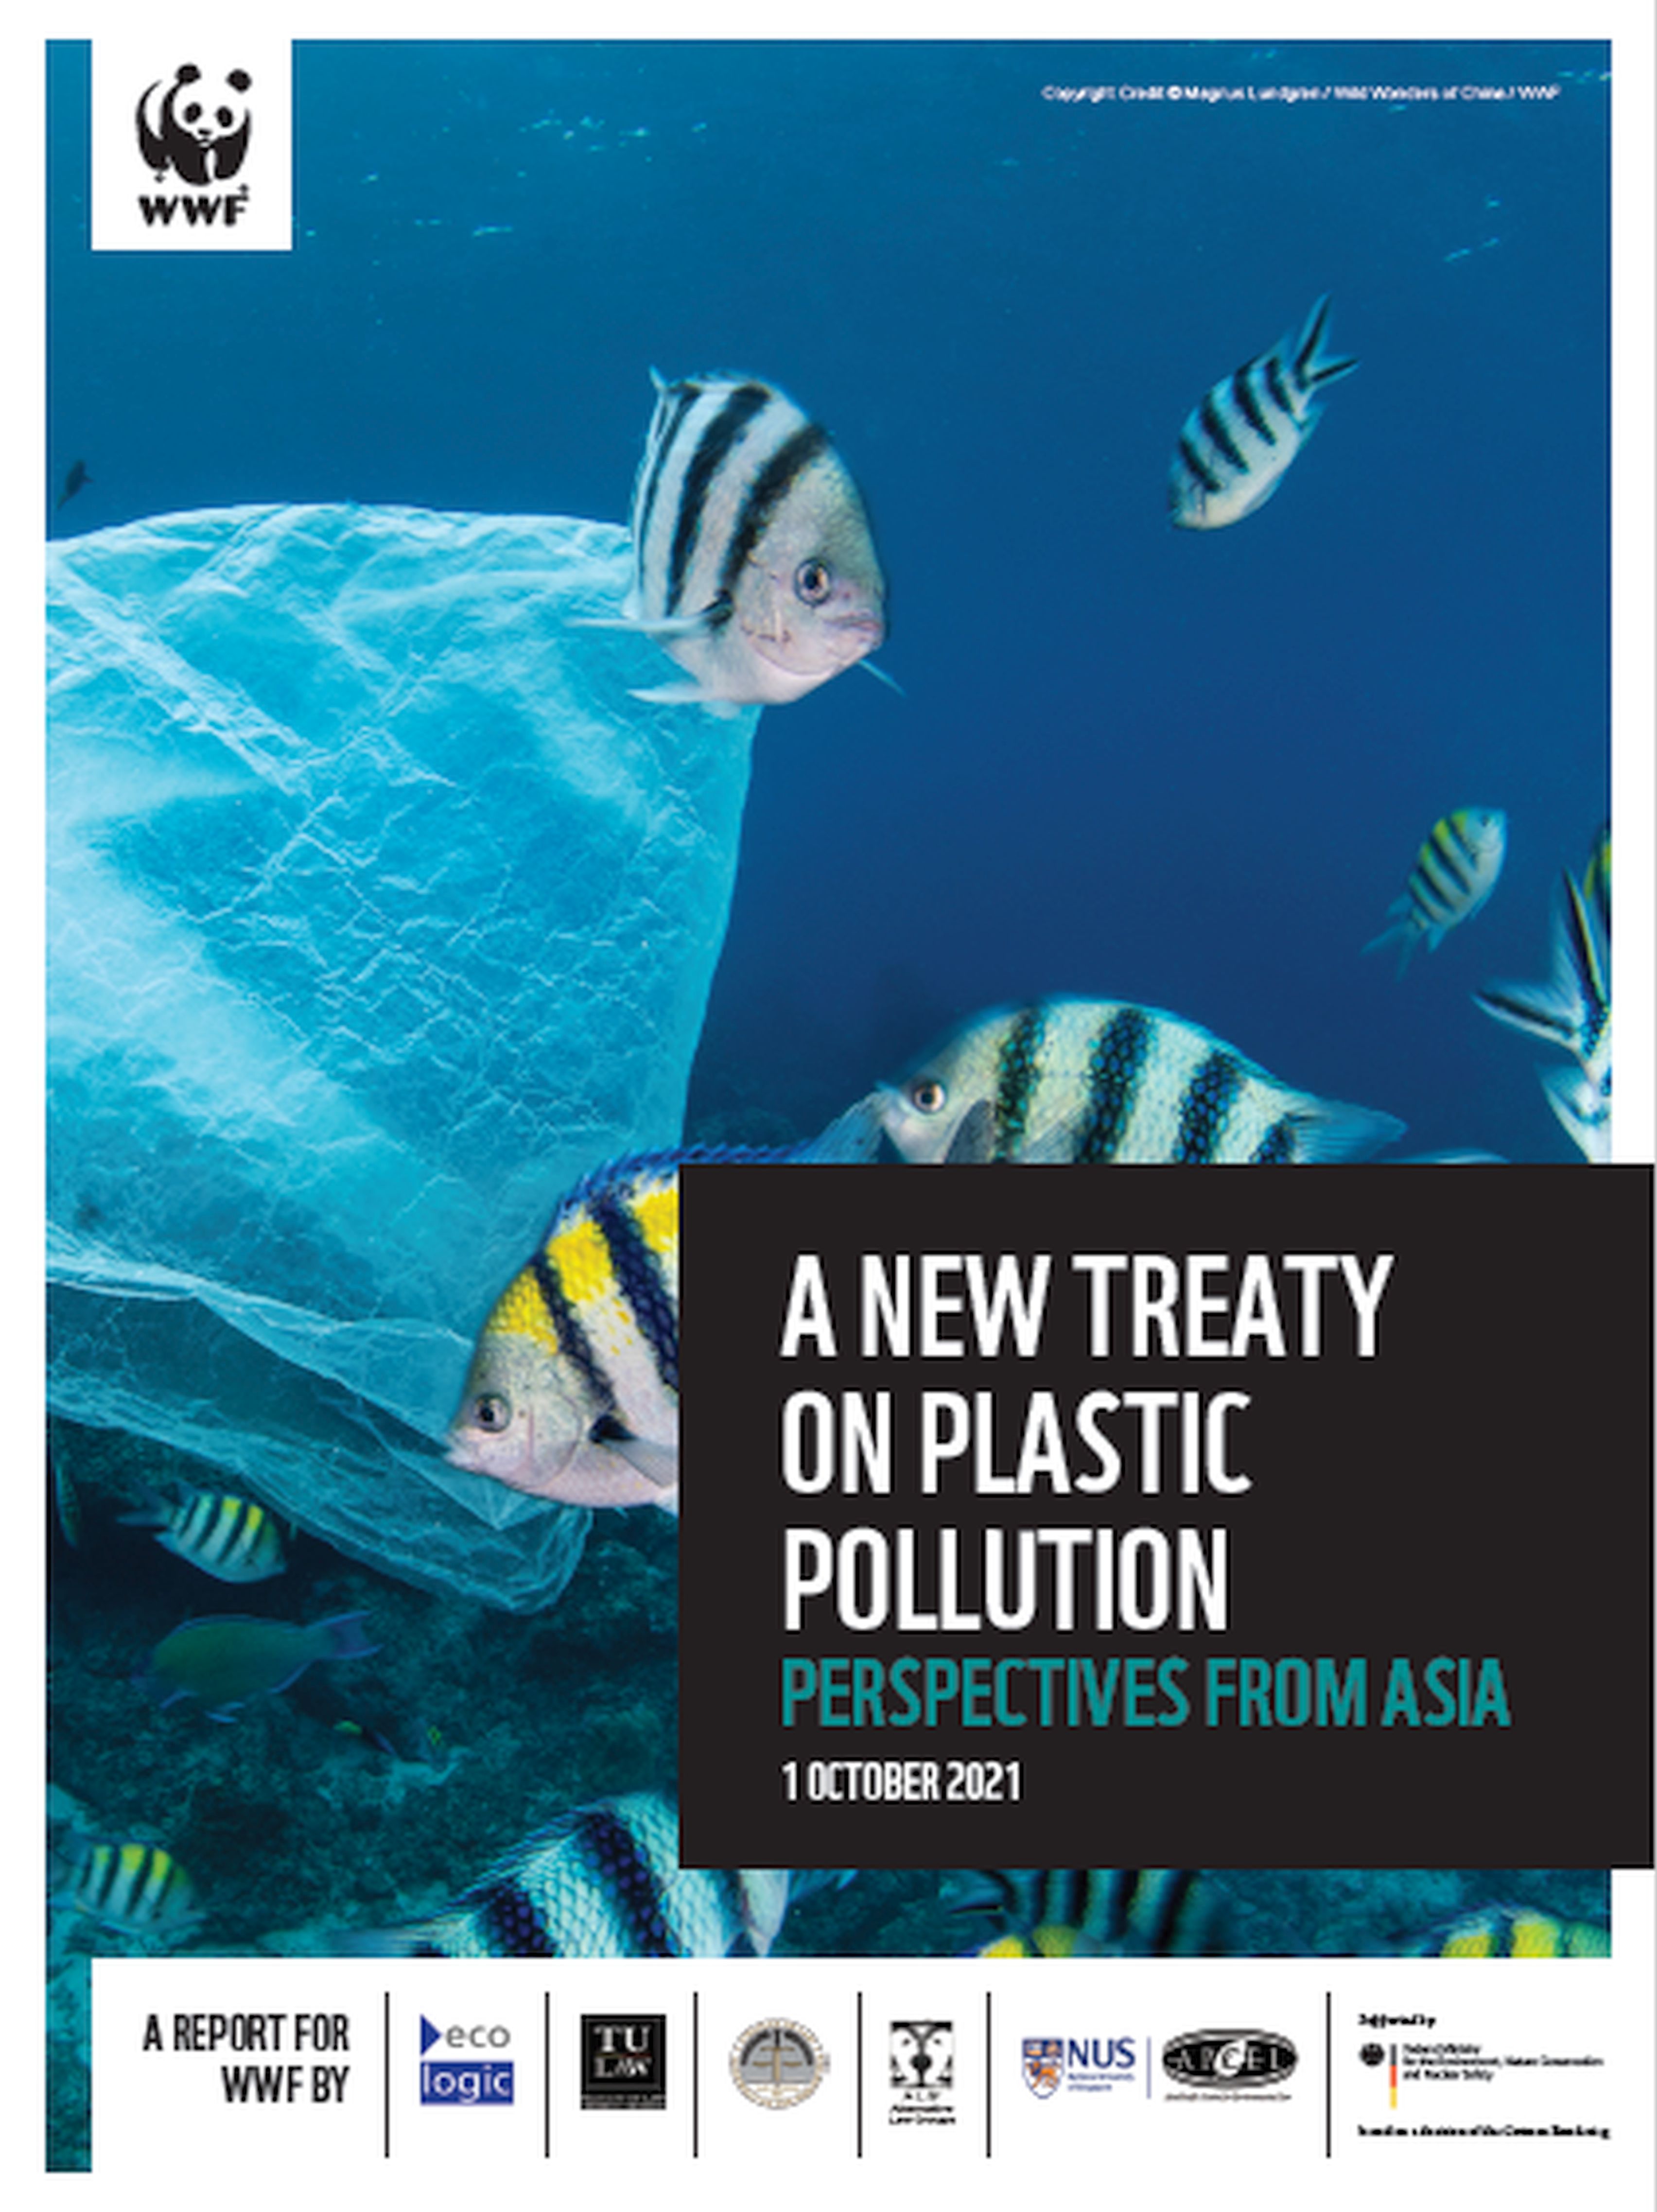 Report cover with image of fish, title, and logos of participating institutions